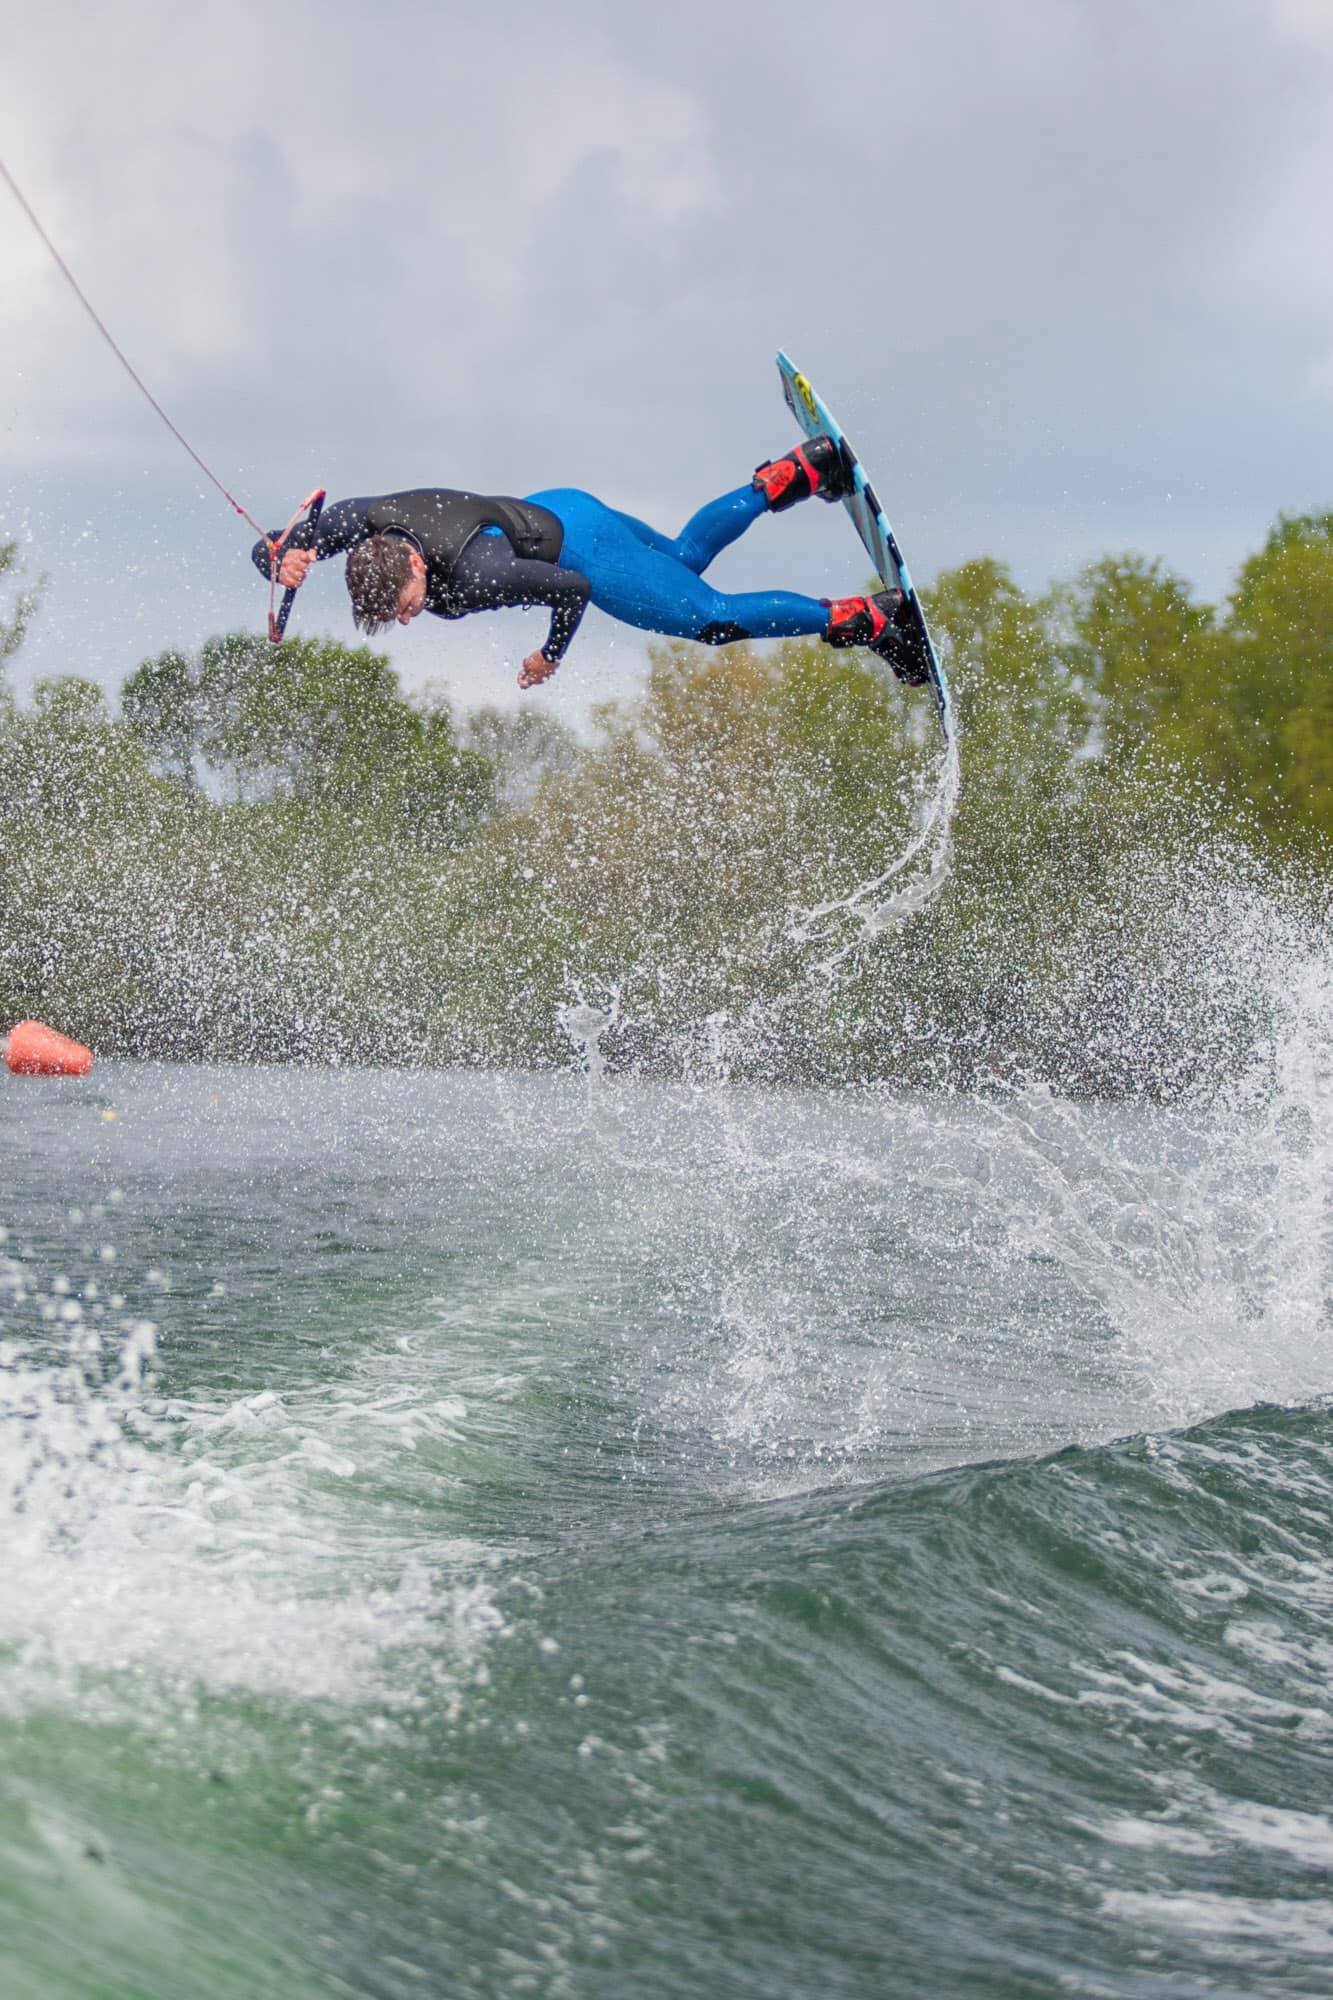 Picture of a person doing an inverted trick on a wakeboard